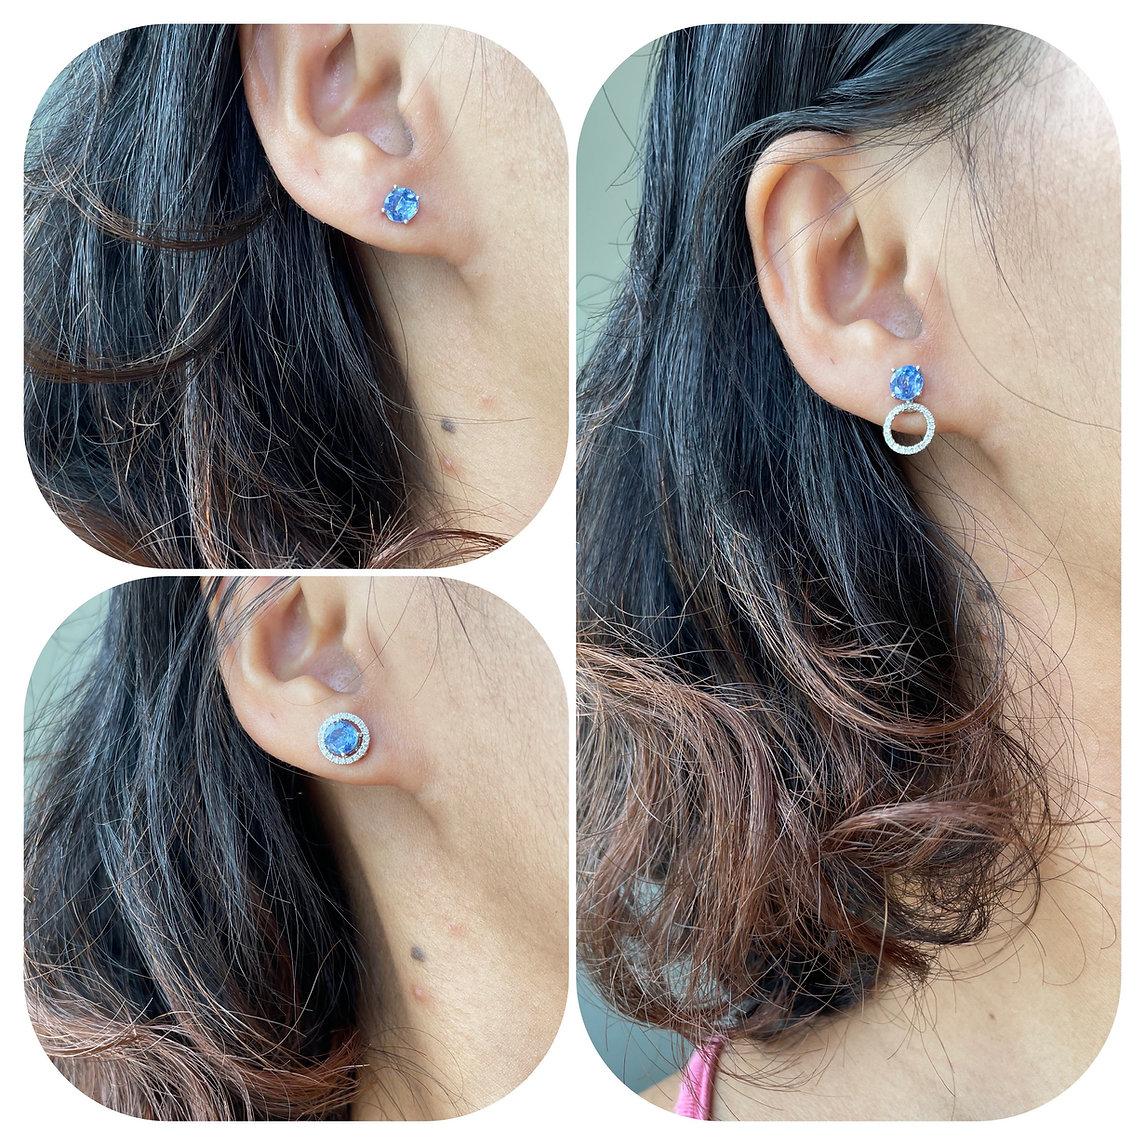 Pastal Blue Sapphire Halo versatile stud earring

This Pastal Blue Sapphire Halo 3Ways versatile stud earring is the perfect accessory for any occasion. It can be transformed from a solitaire stud, halo, or drop earring to suit your style. The